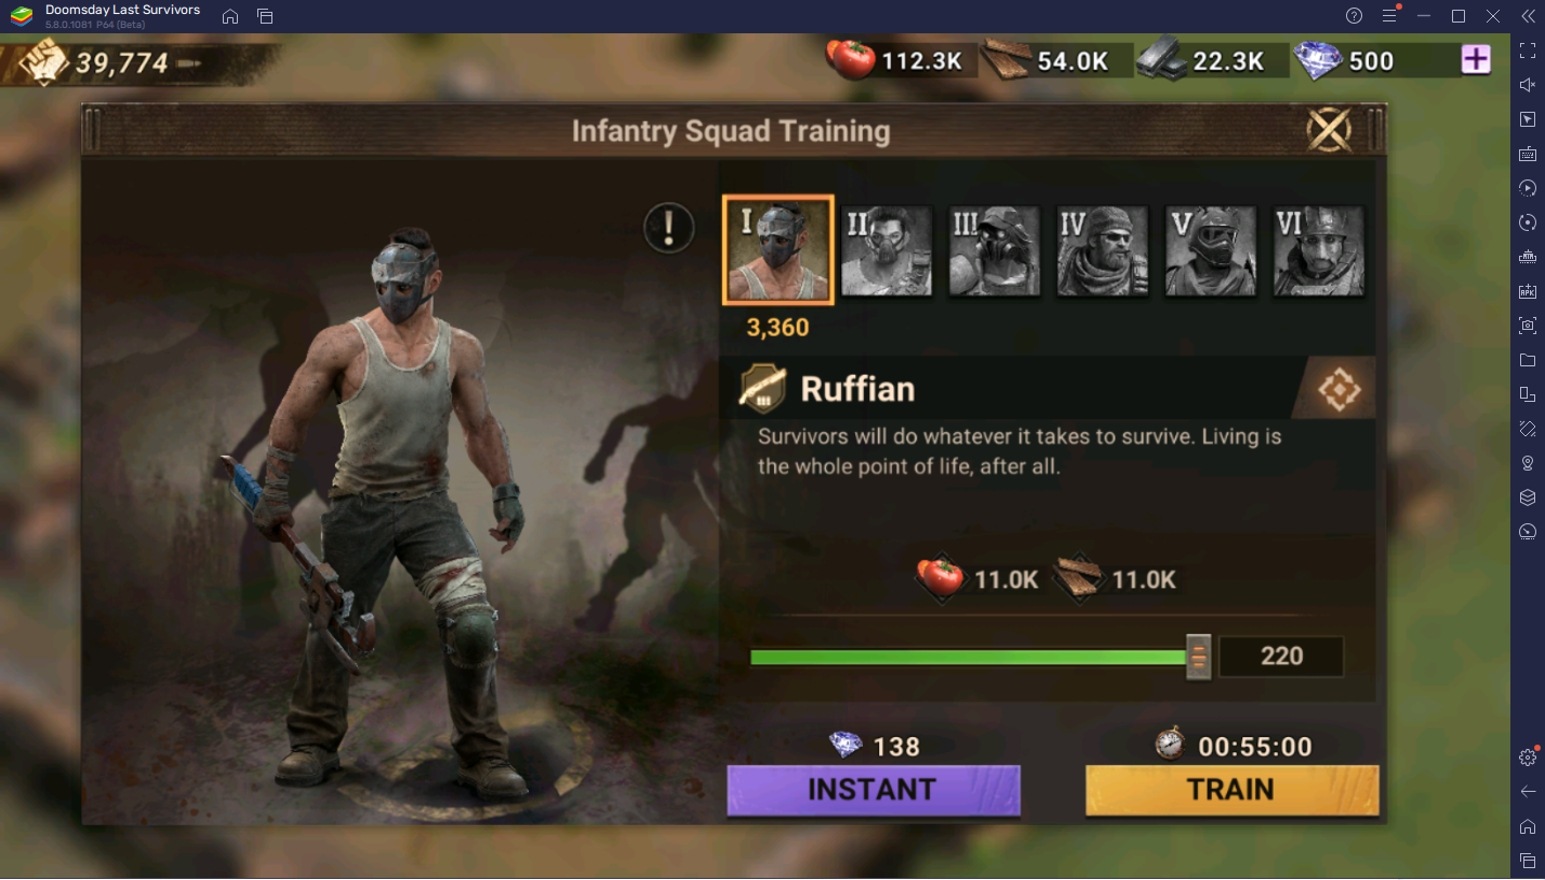 BlueStacks' Beginners Guide to Playing Doomsday: Last Survivors